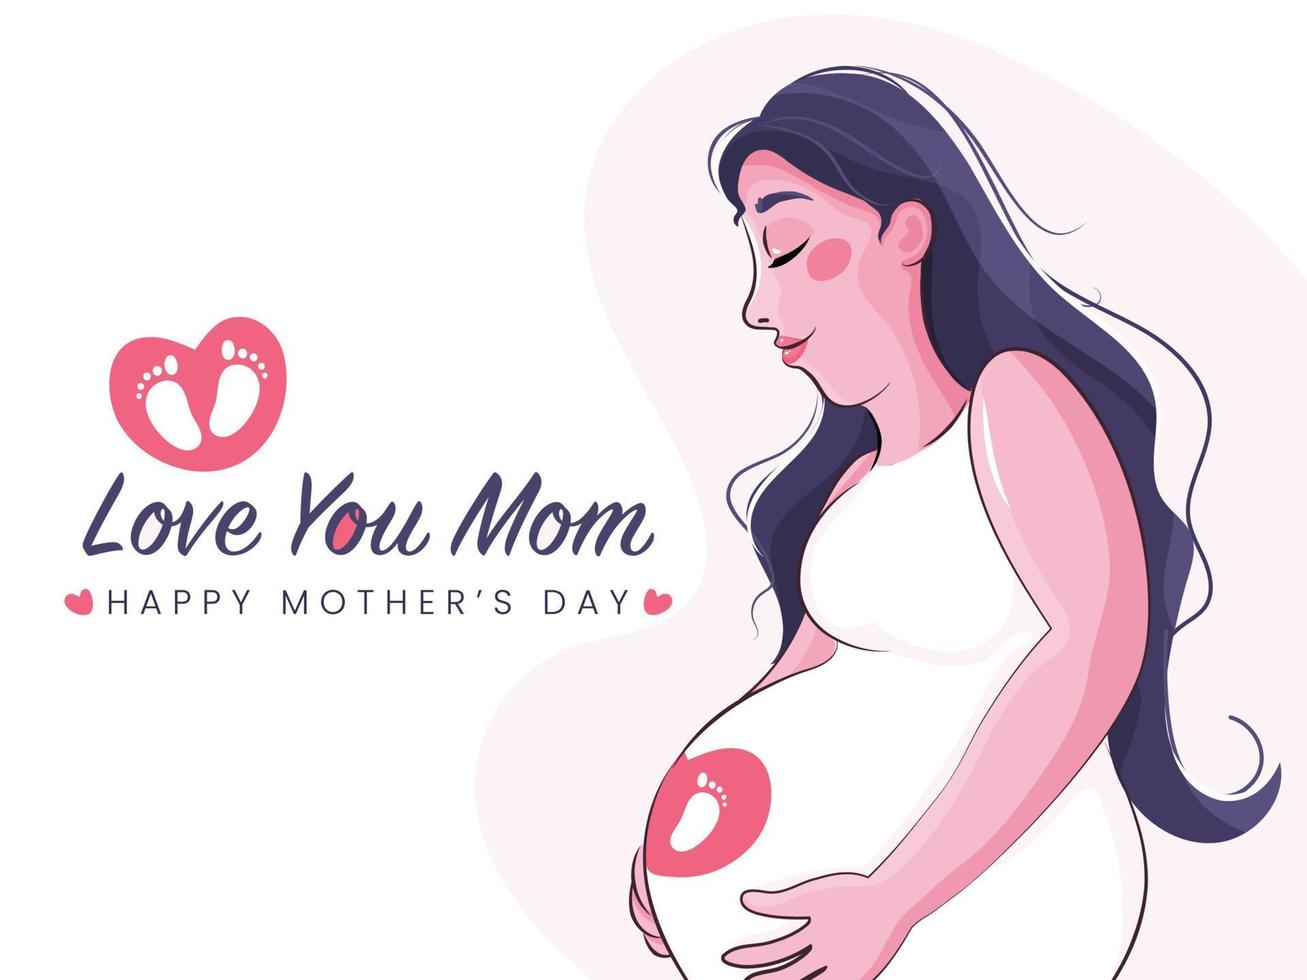 Illustration of a Pregnant Mom and text Love You Mom. Happy Mother's Day Concept. vector